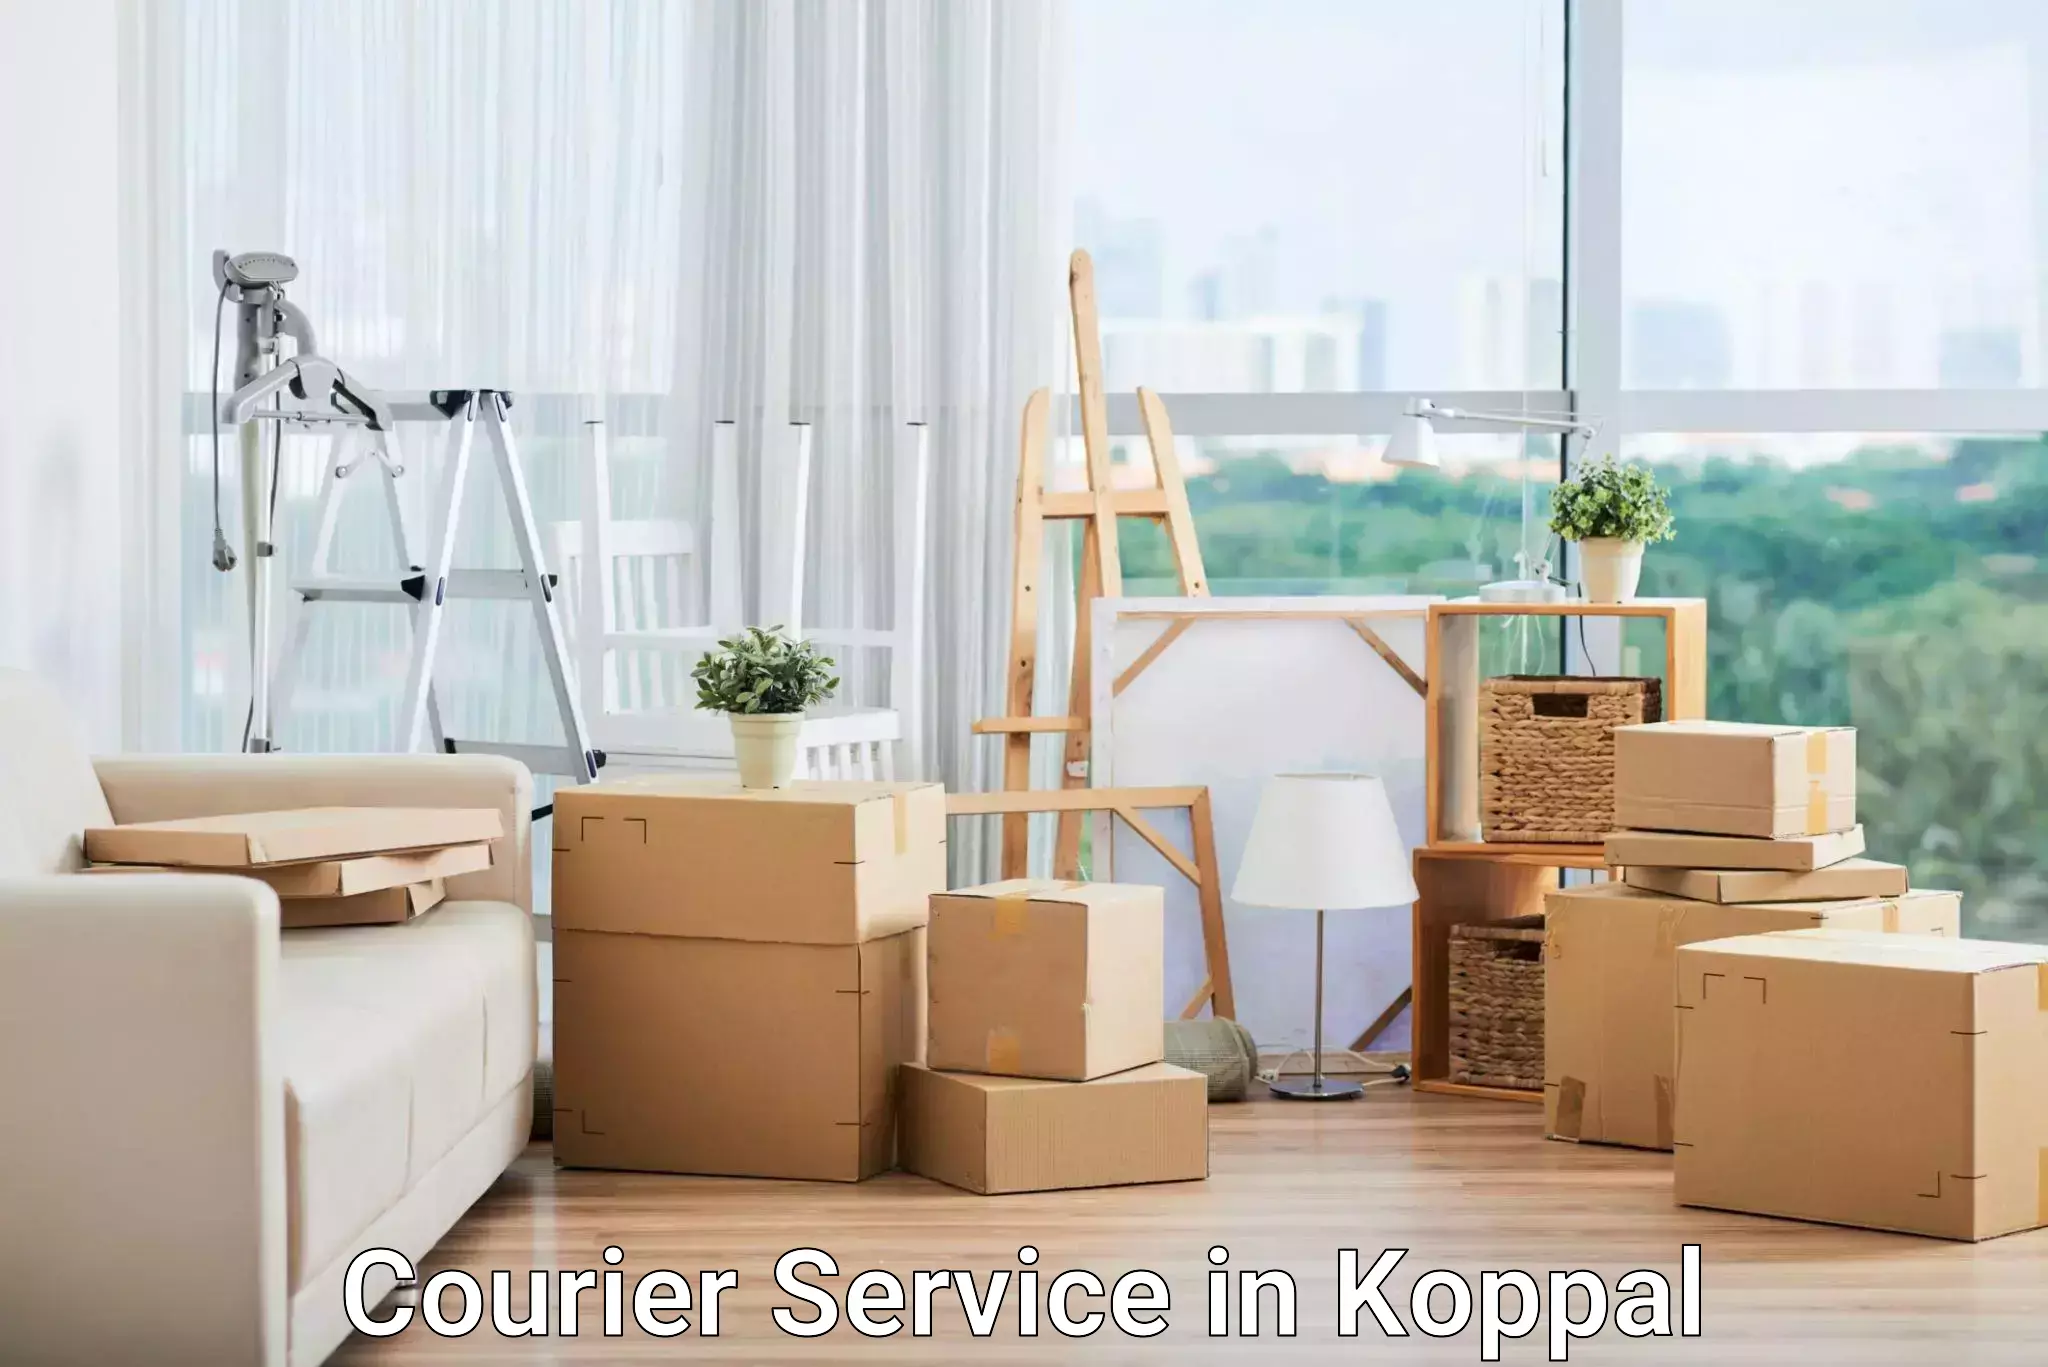 Personalized courier experiences in Koppal